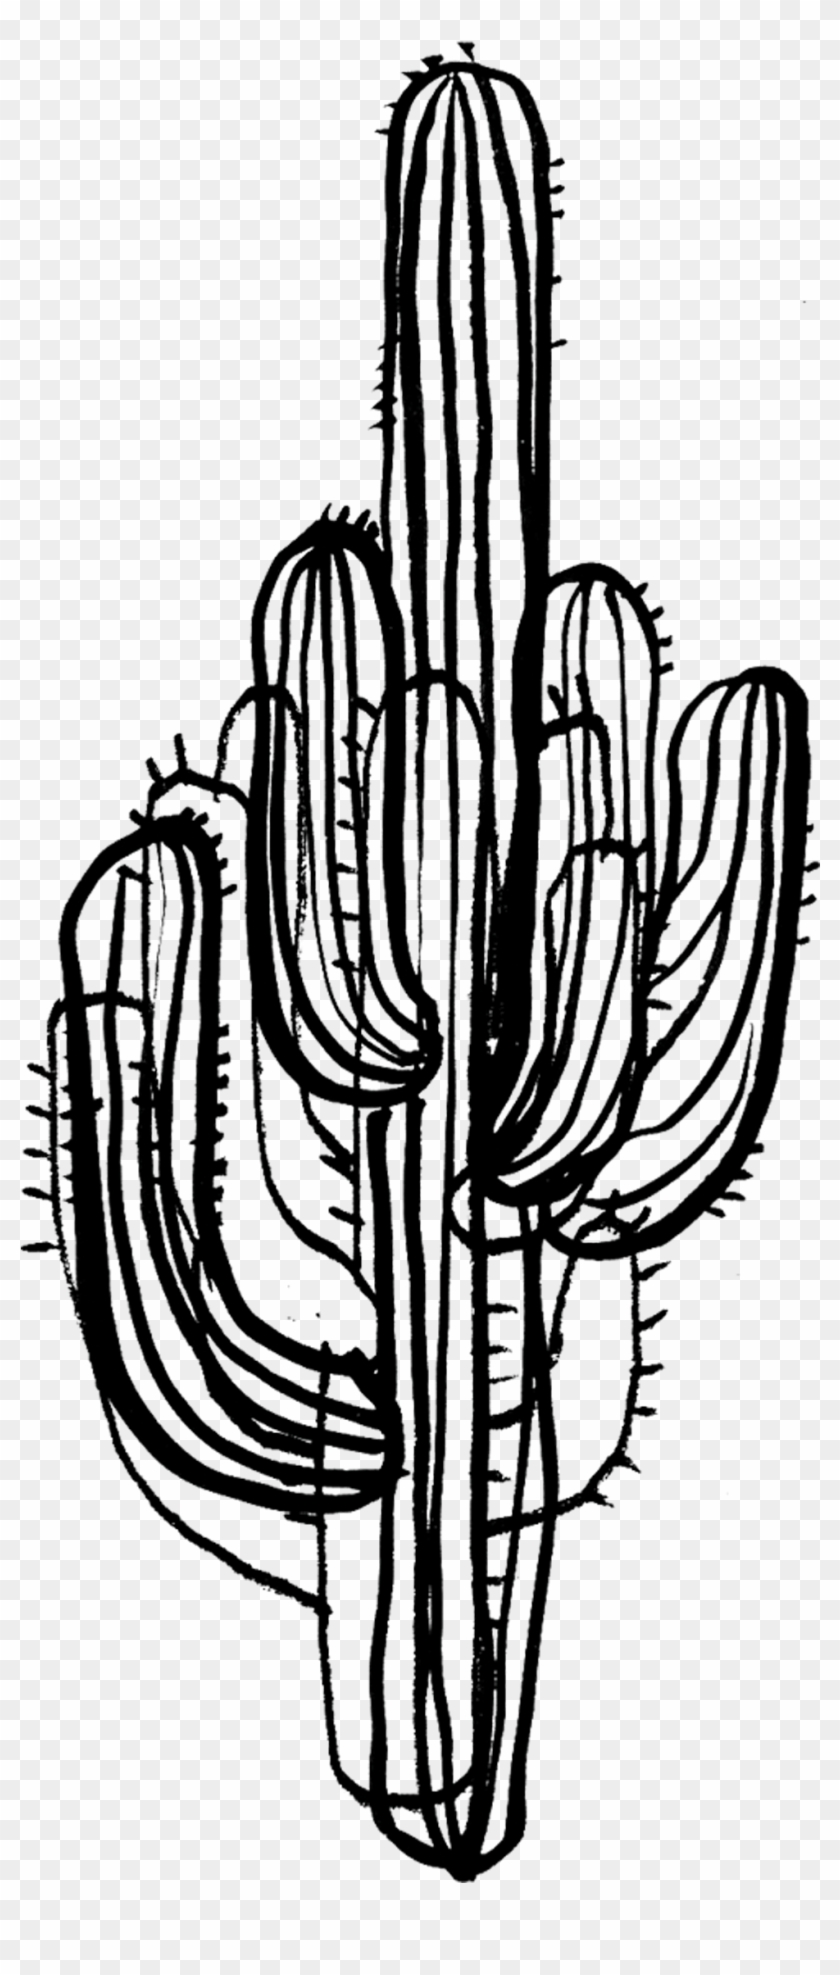 2048 X 2048 1 - Cactus Png Black And White Clipart #588232